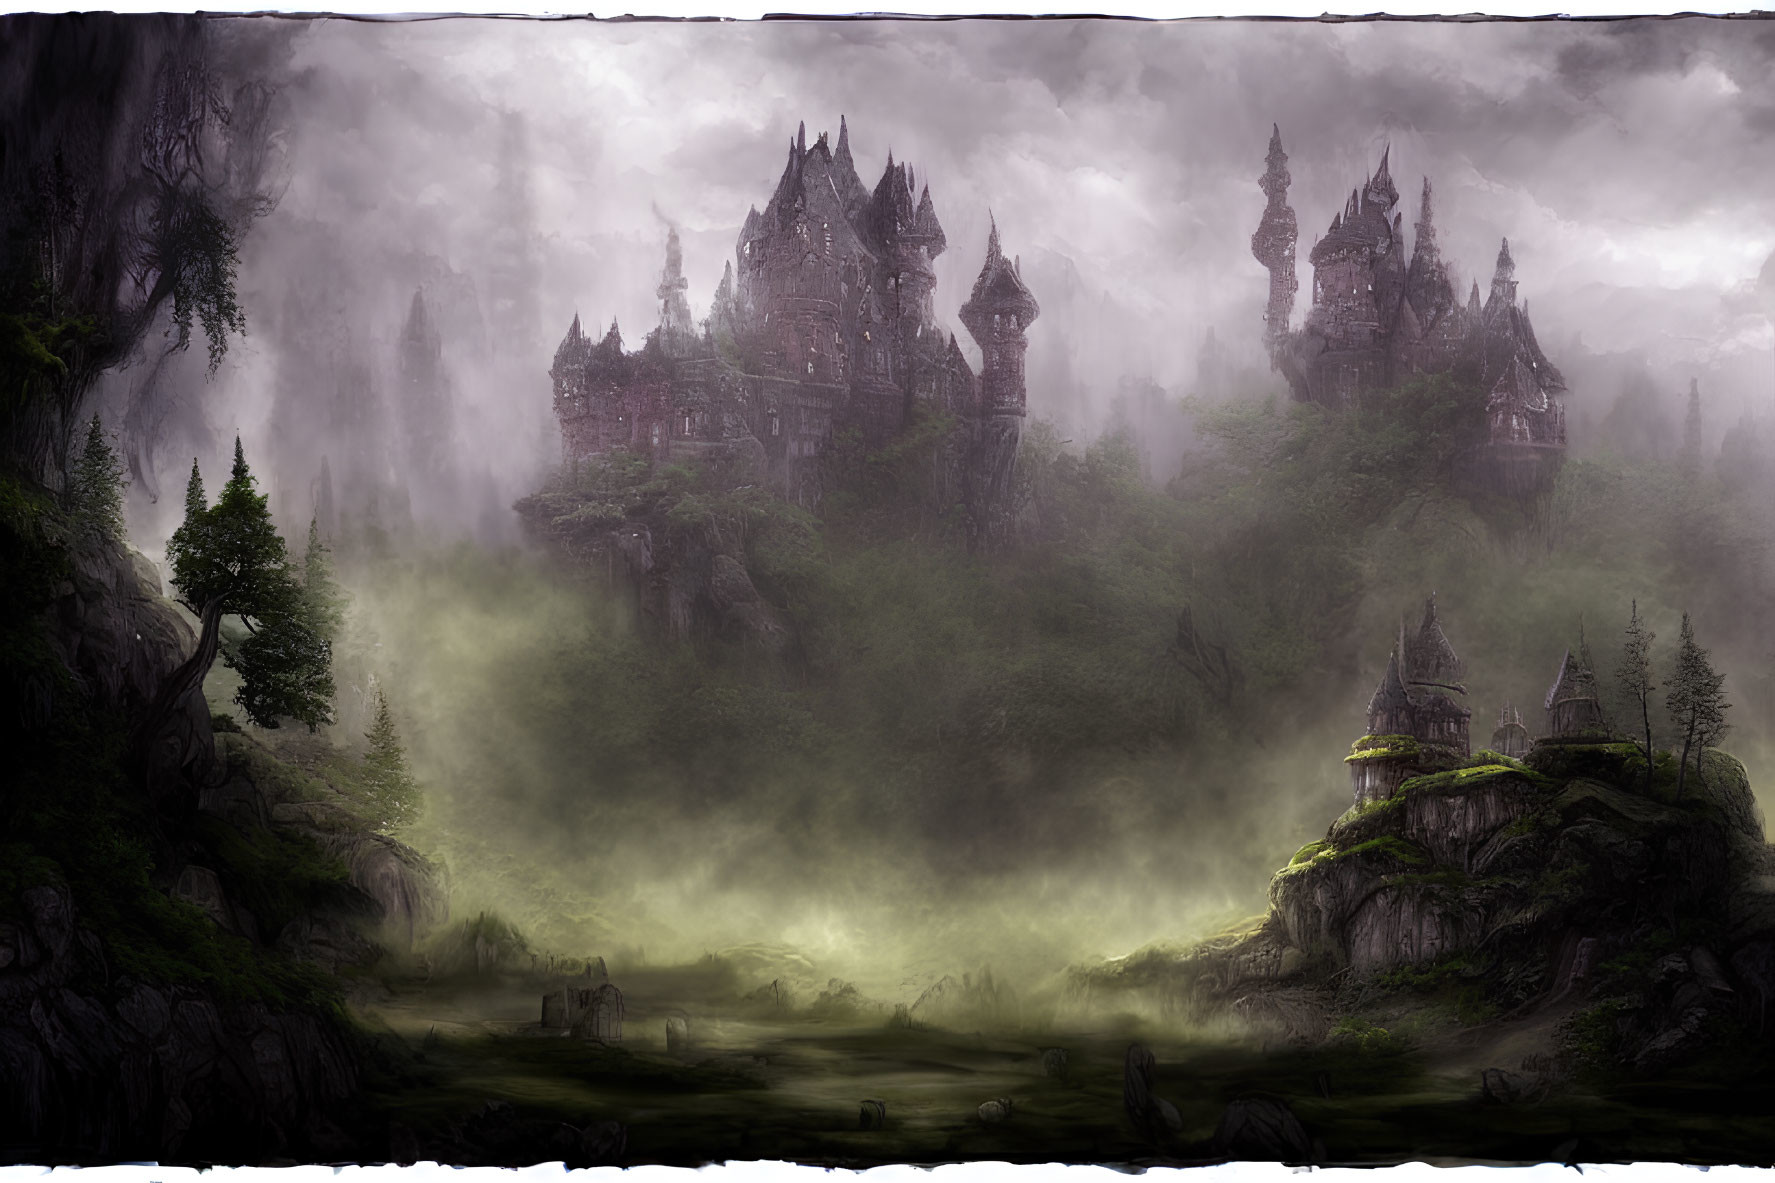 Mysterious Gothic castle in misty forest under overcast sky